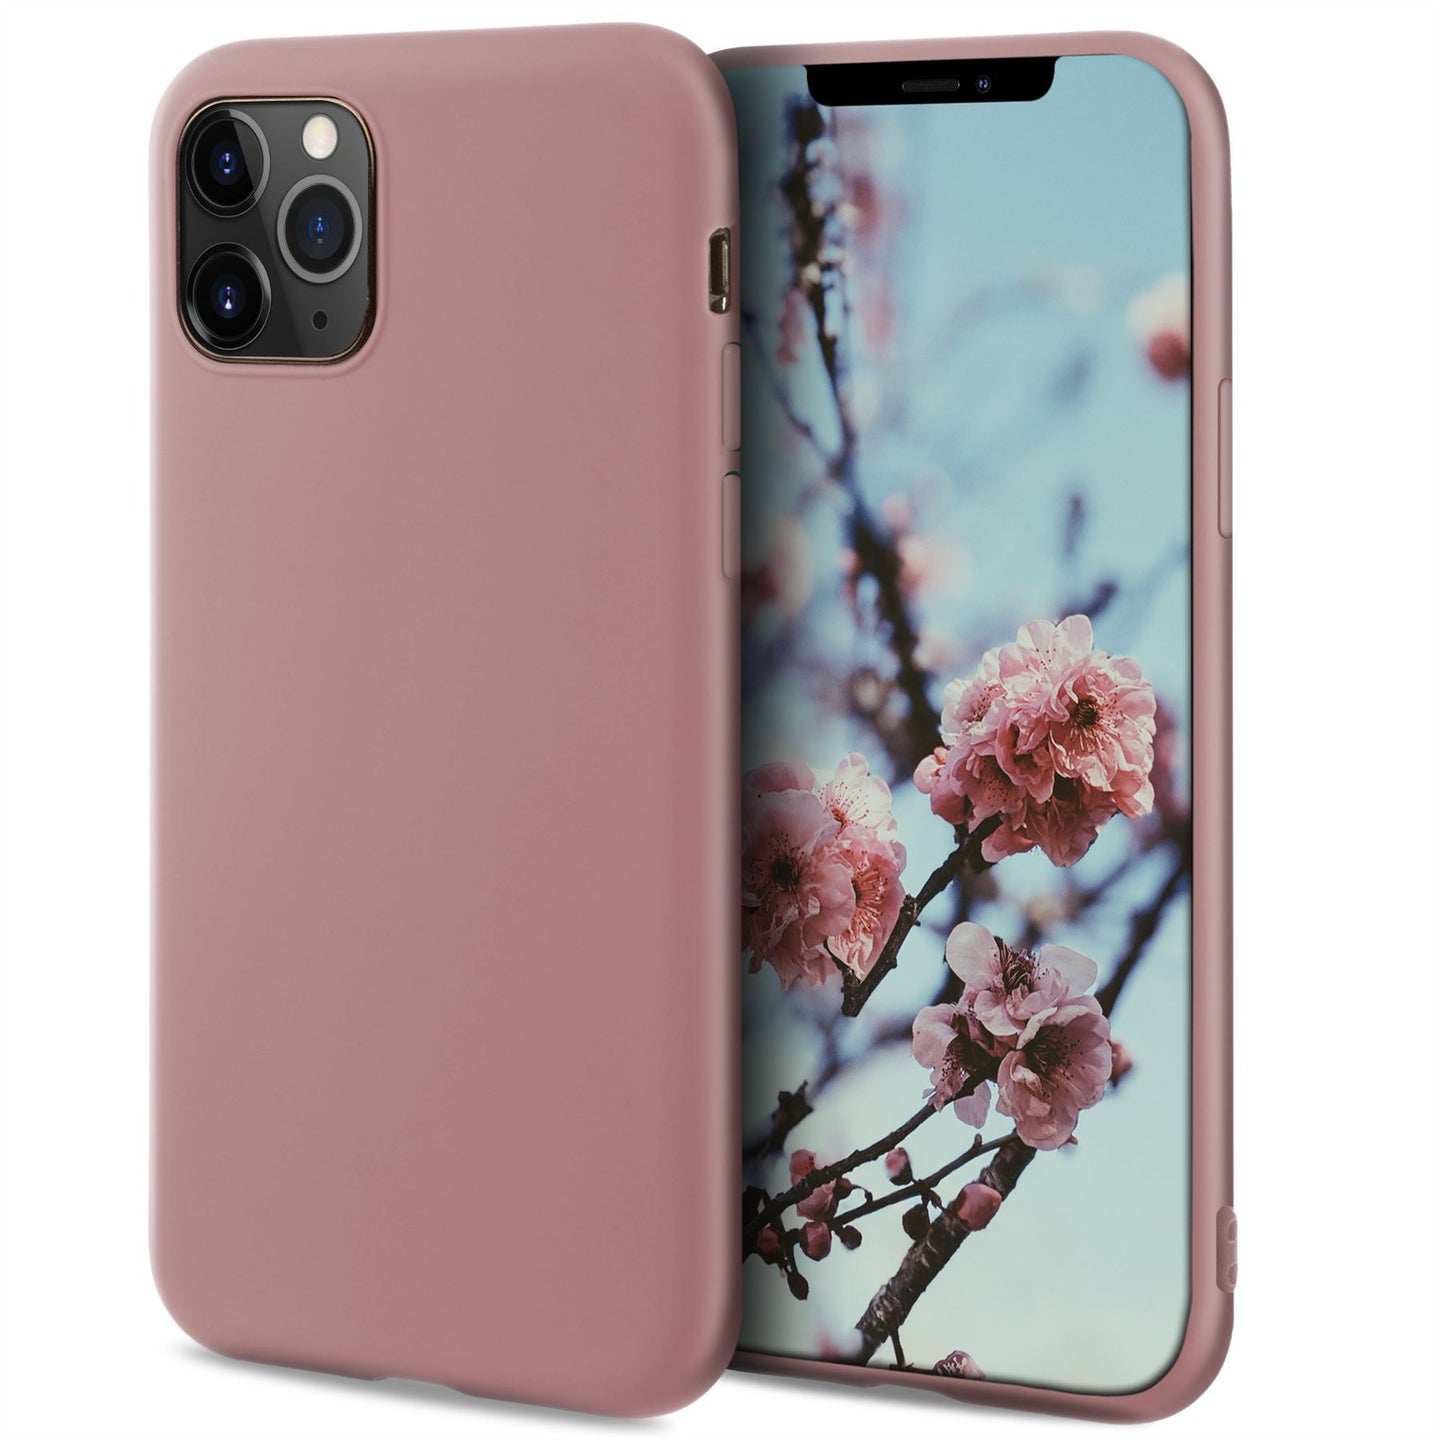 Moozy Minimalist Series Silicone Case for iPhone 11 Pro Max, Rose Beige - Matte Finish Slim Soft TPU Cover